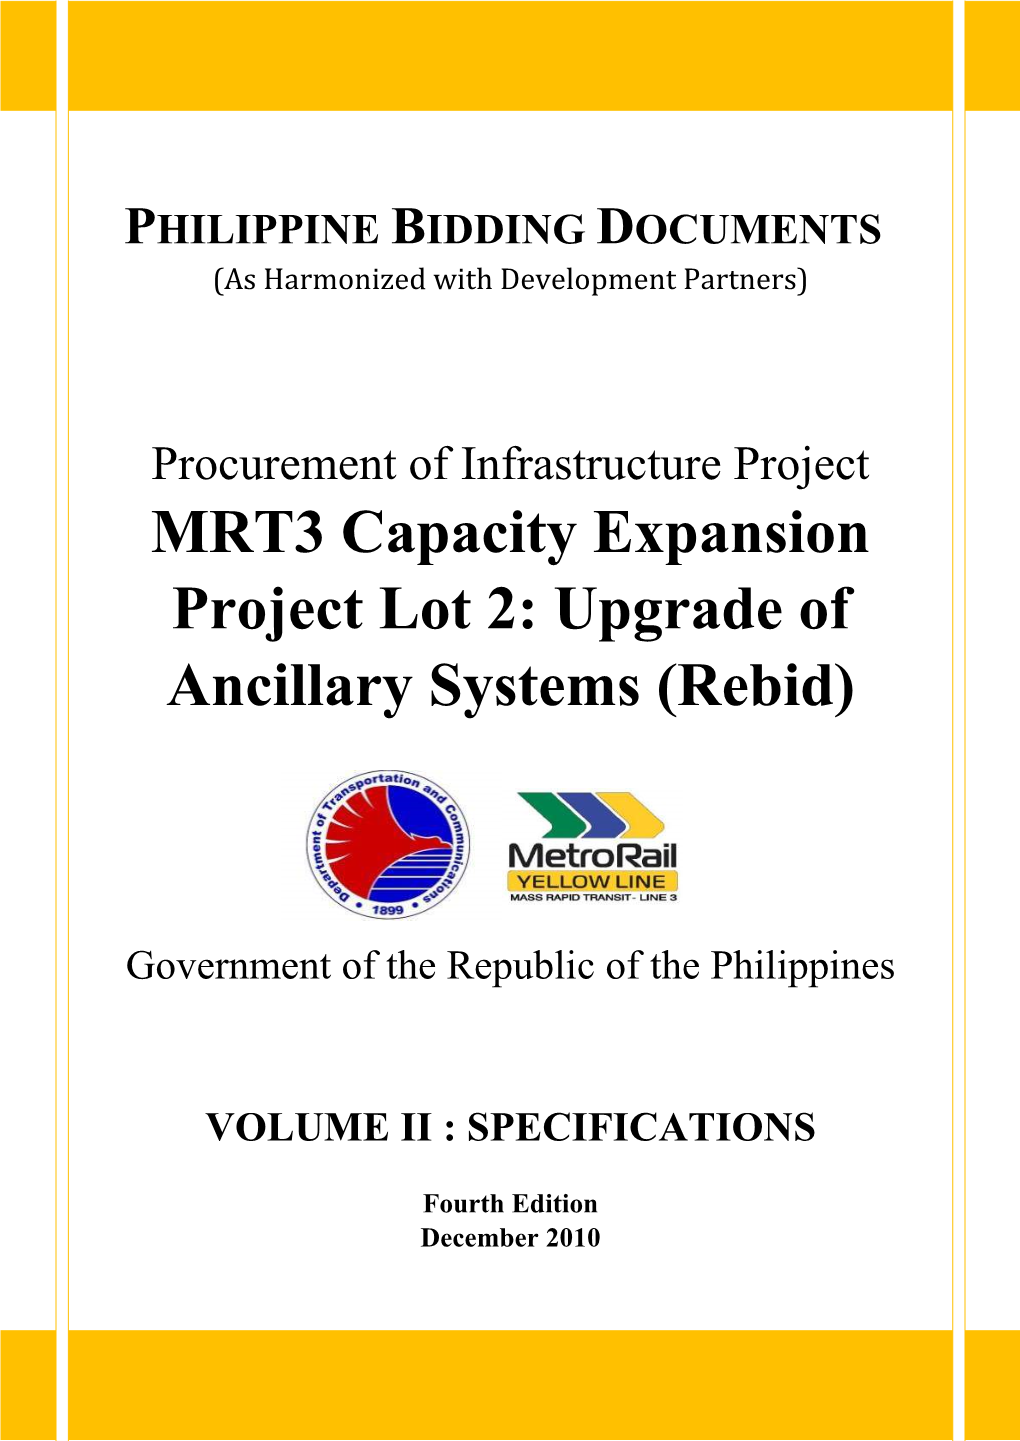 MRT3 Capacity Expansion Project Lot 2: Upgrade of Ancillary Systems